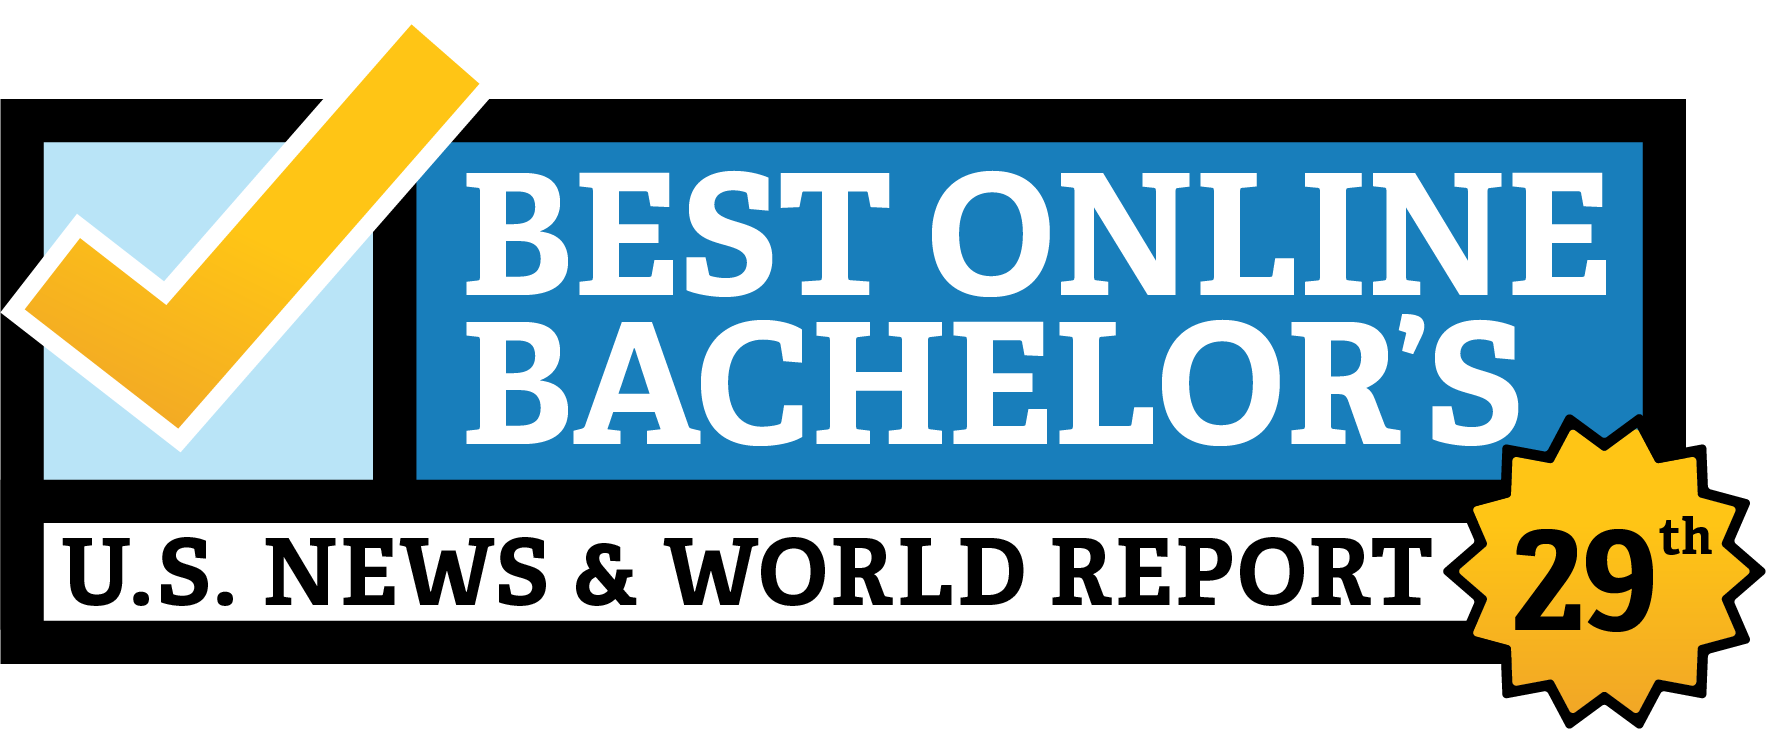 graphic image showing DSC's ranking as No.29 for best online bachelor's degree